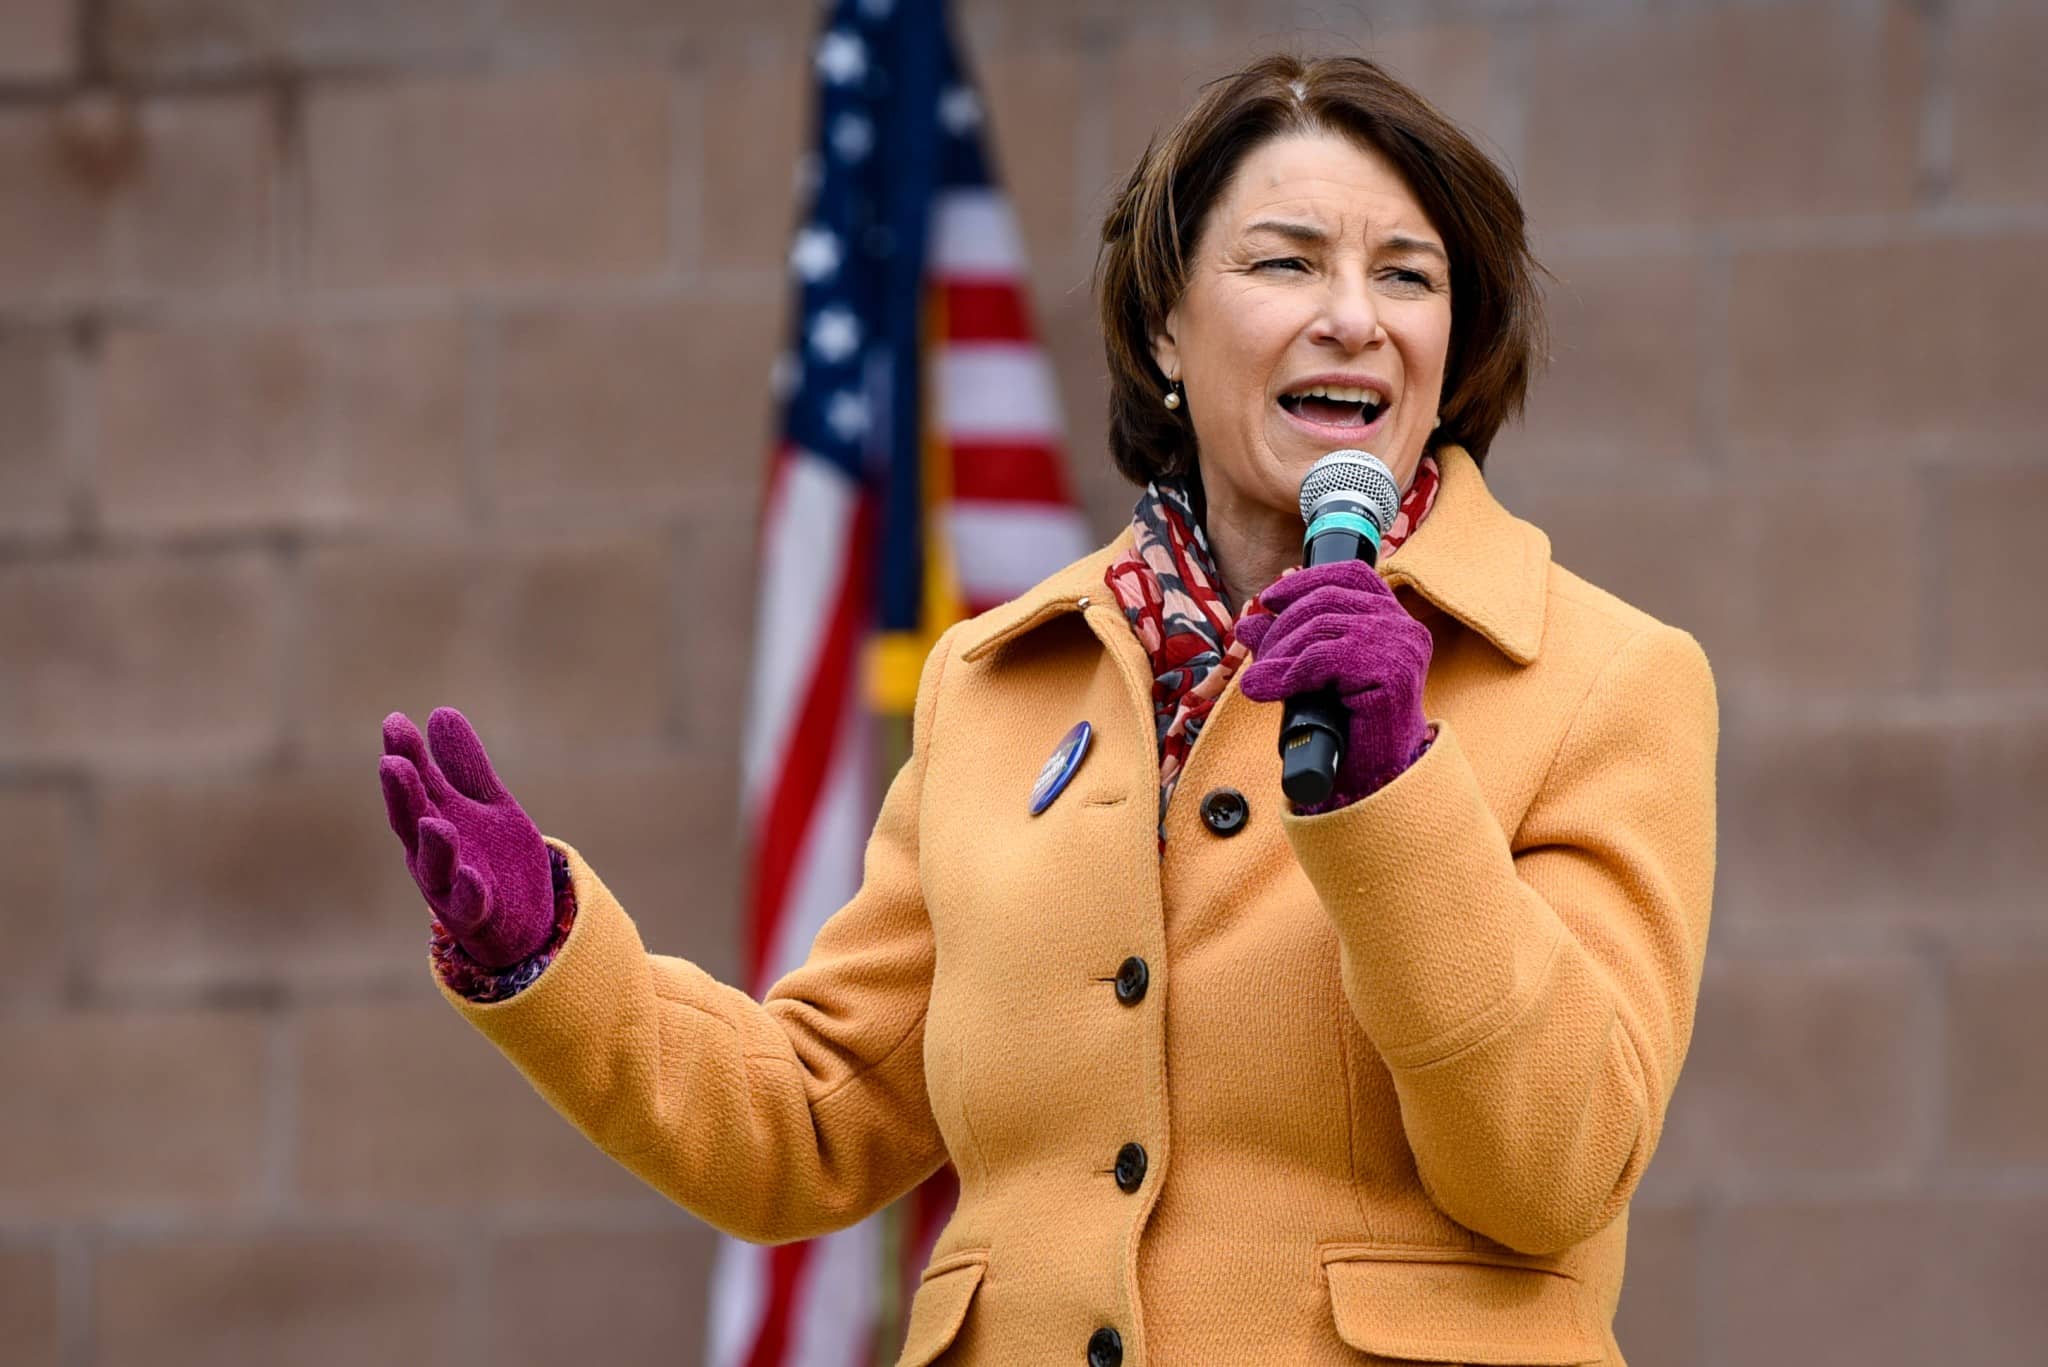 Sen. Amy Amy Klobuchar speaks during a Get Out the Vote! campaign event on Oct. 17, 2020. (Gage Anthony Cureton/Shutterstock)